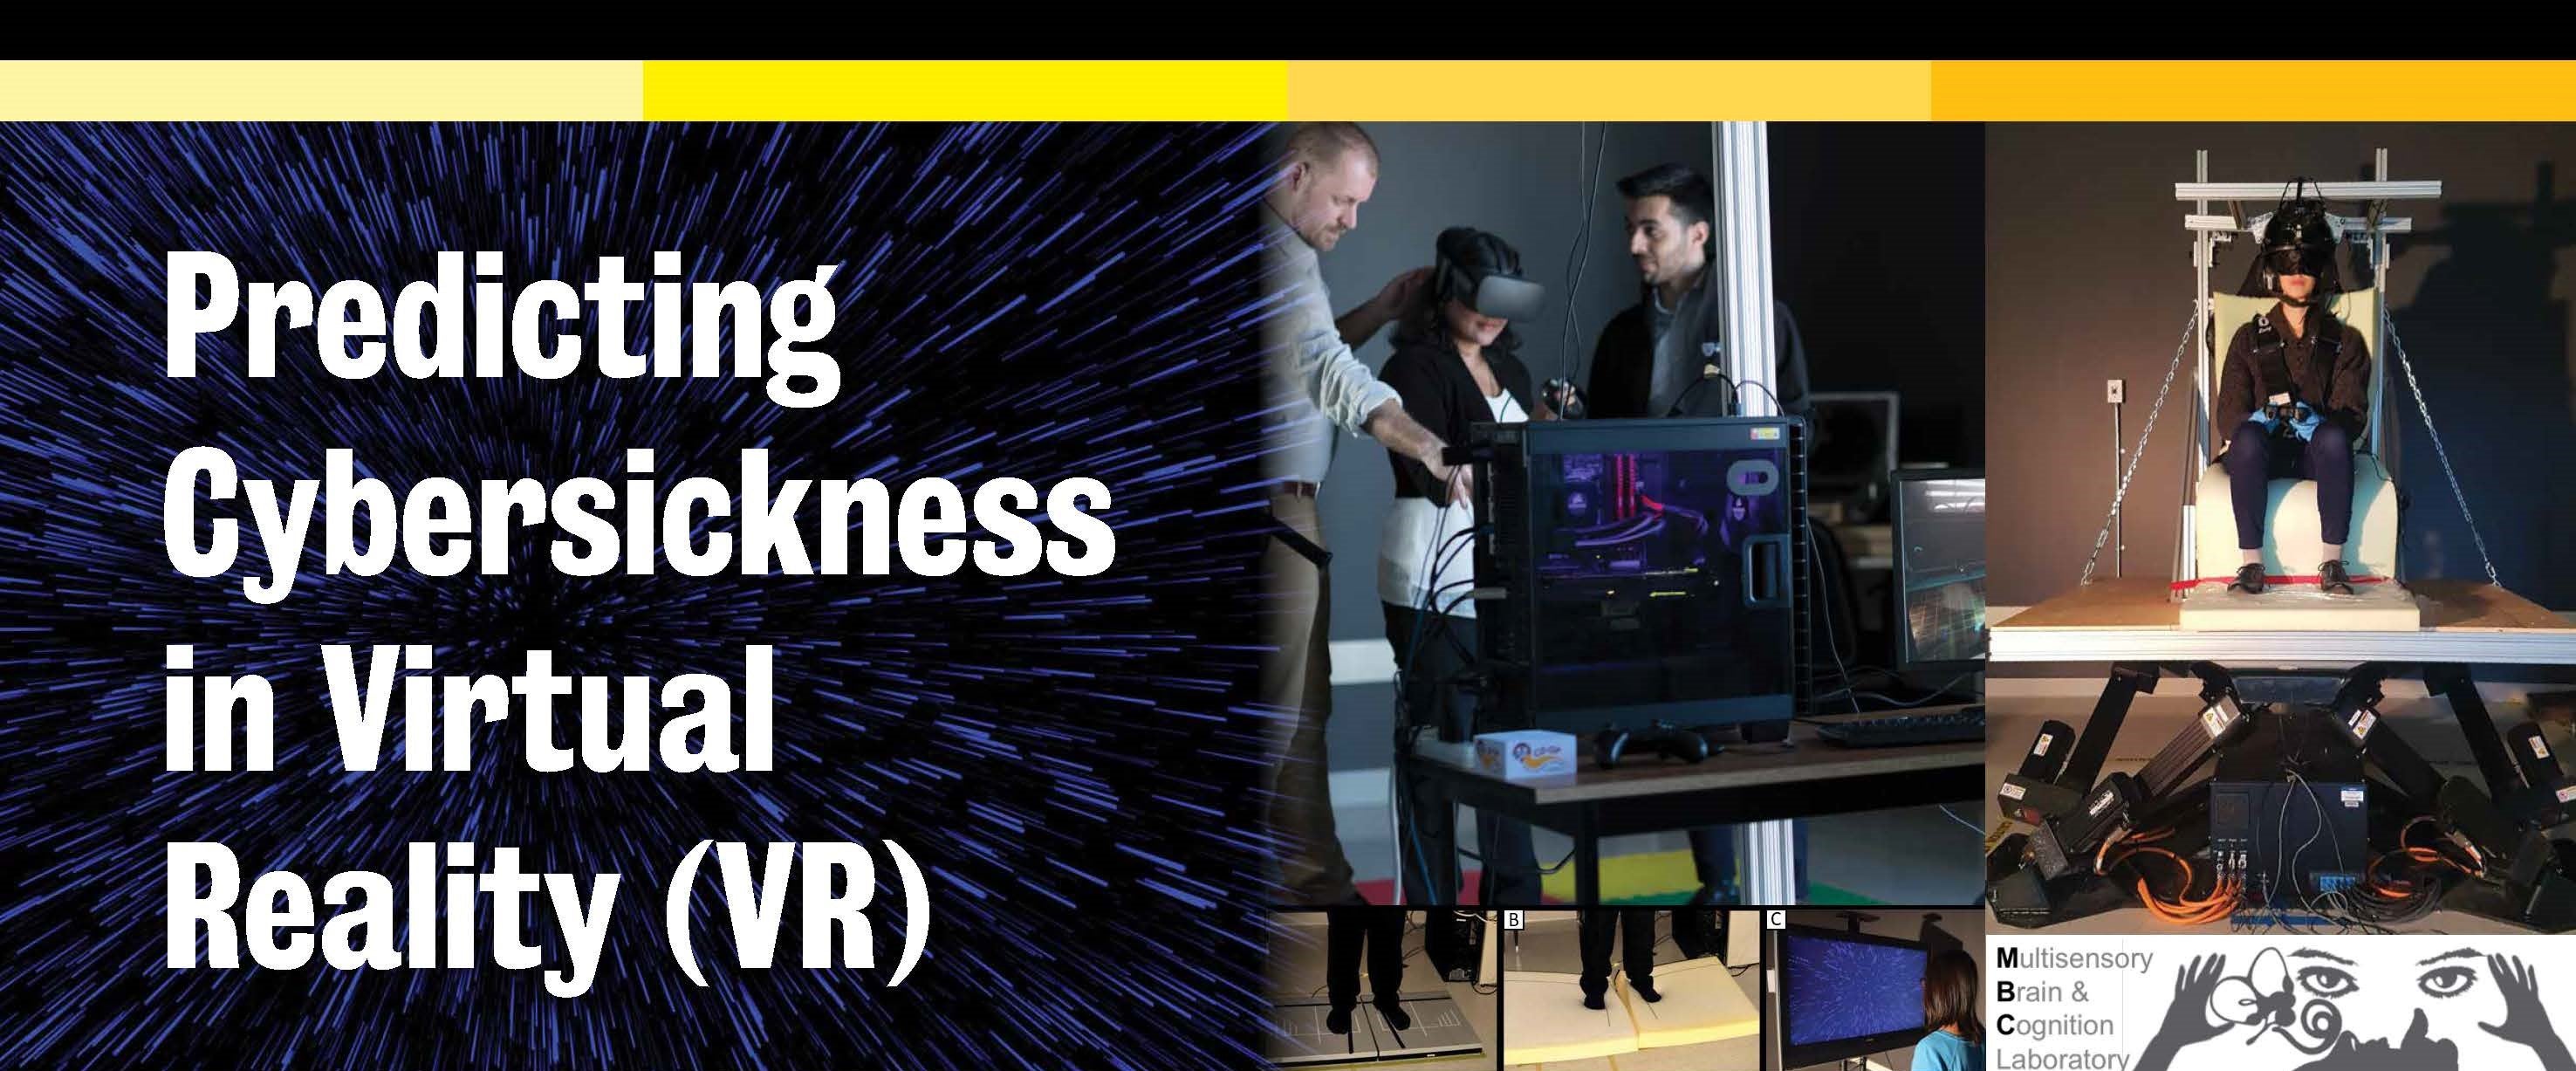 Predicting Cybersickness in Virtual Reality (VR) poster title; VR equipment tested by people